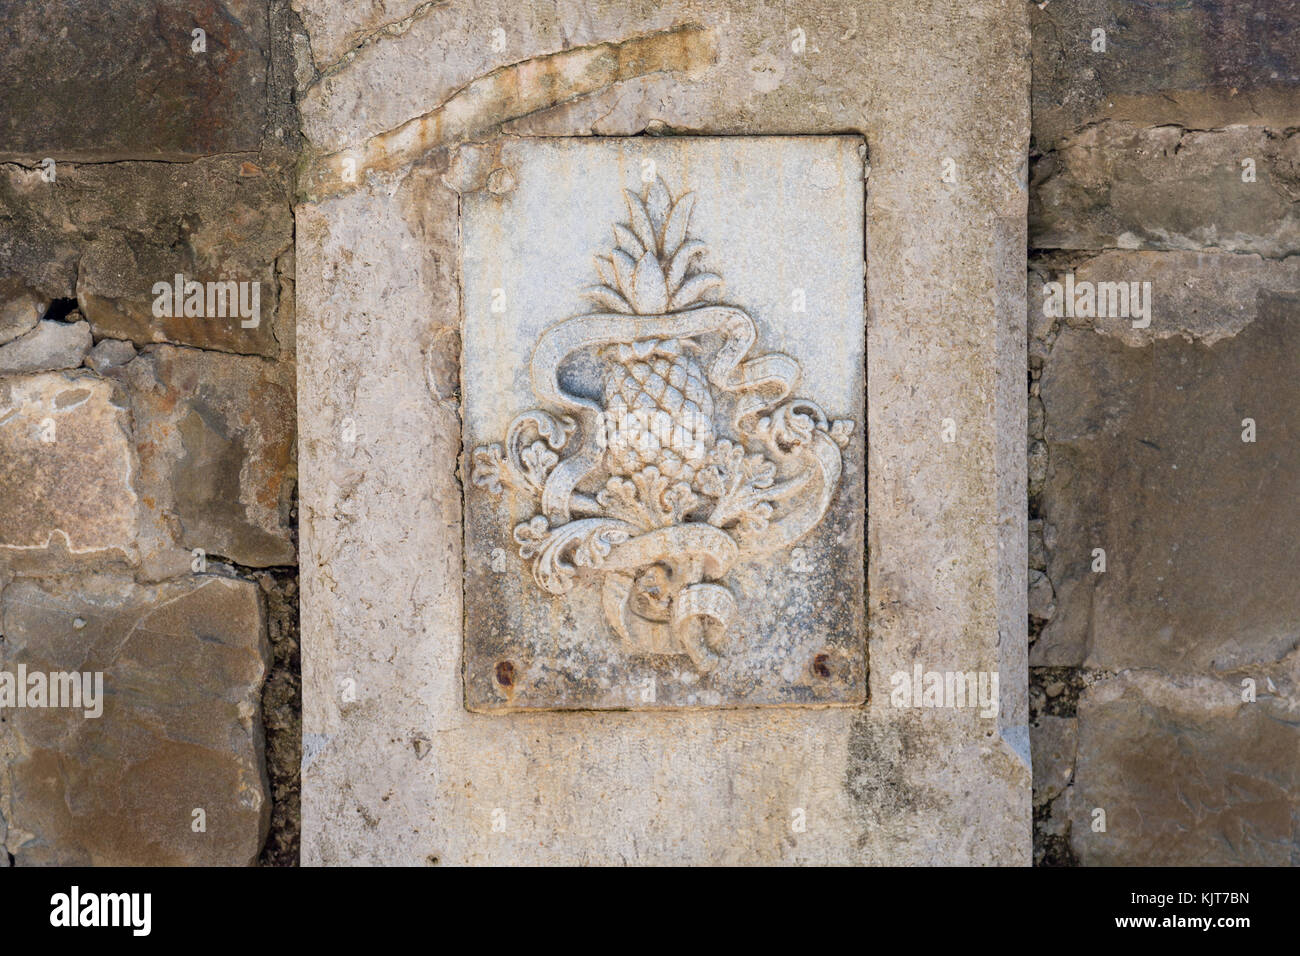 Royal pineapple symbol of Mexican Emperor Maximilian on a stone wall at castle Miramare, Trieste, Italy Stock Photo